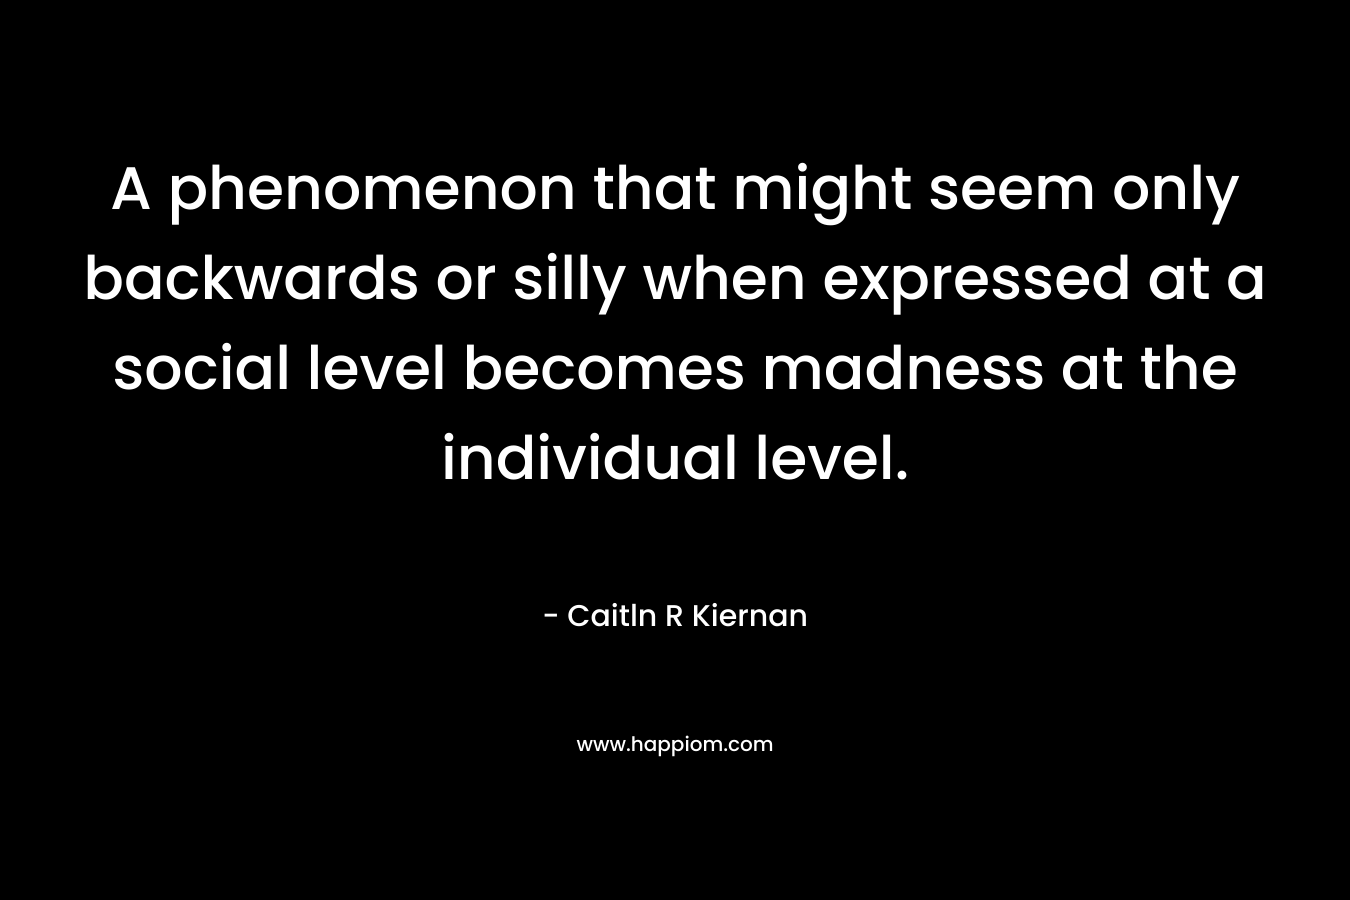 A phenomenon that might seem only backwards or silly when expressed at a social level becomes madness at the individual level. – Caitln R Kiernan